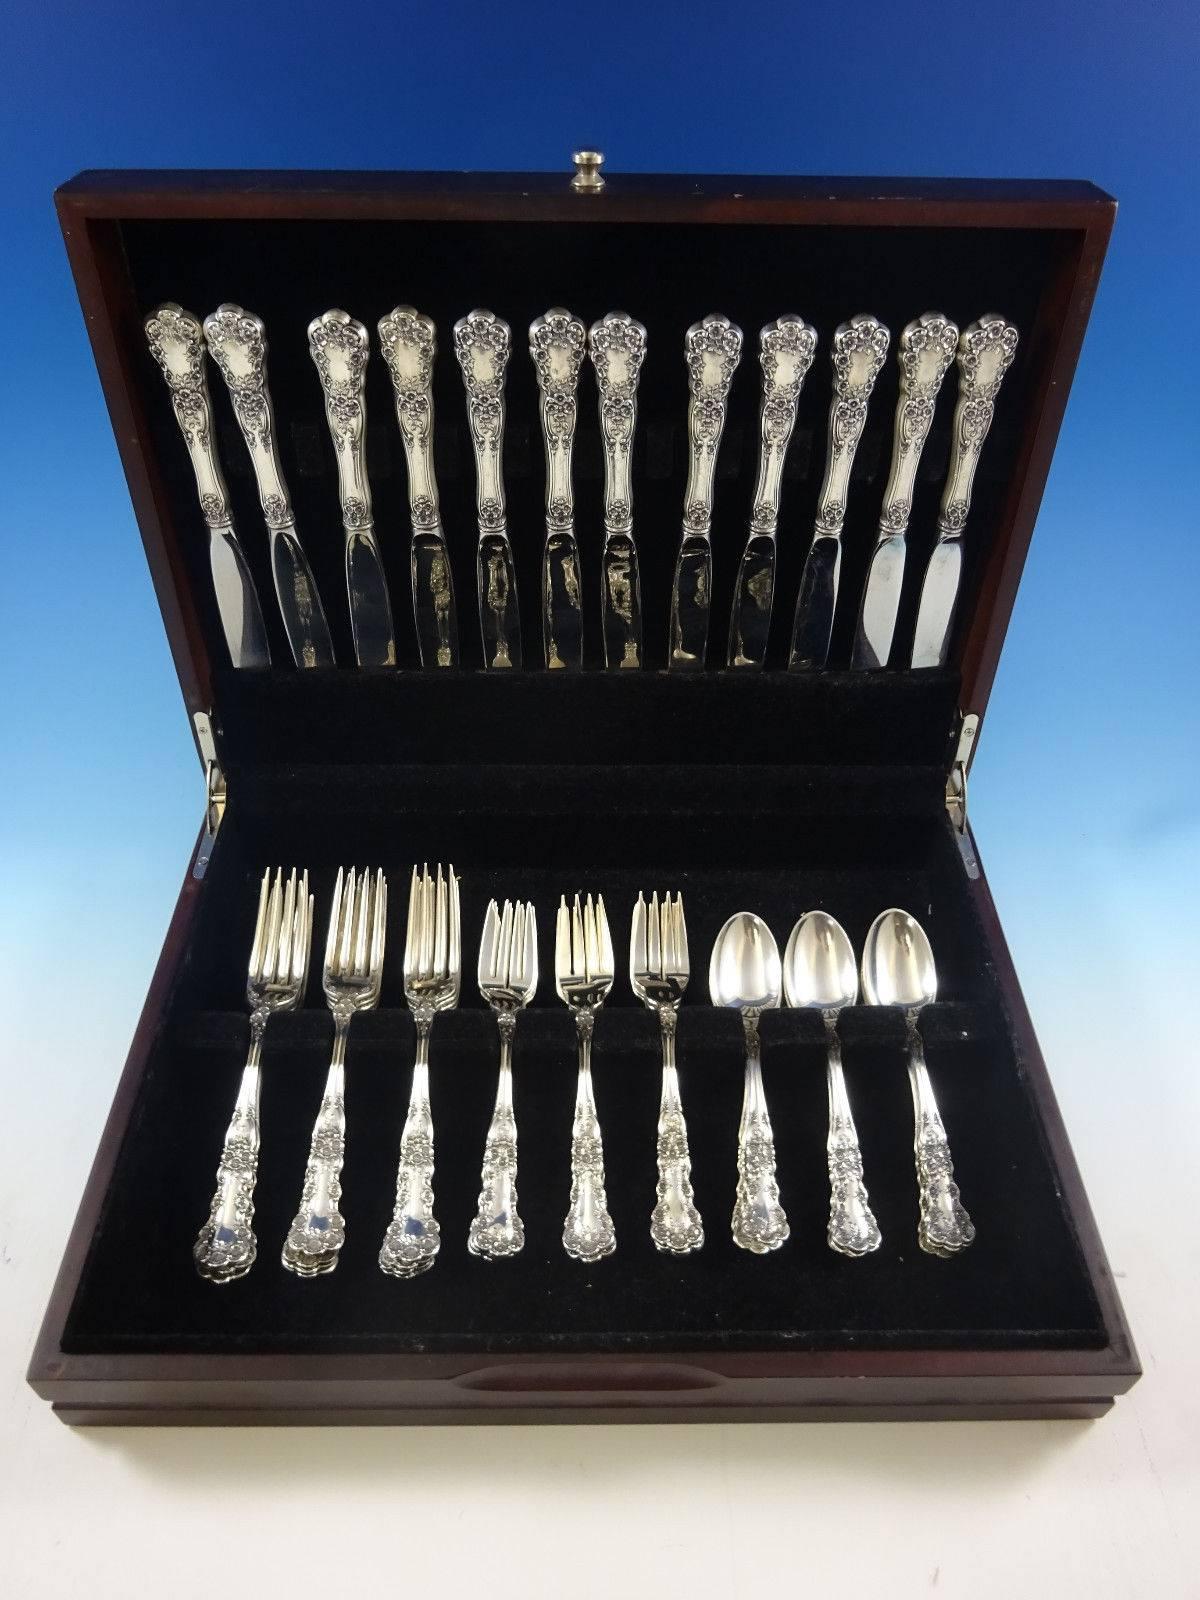 Buttercup by Gorham sterling silver flatware set - 48 pieces. This set includes:

12 knives, 8 7/8